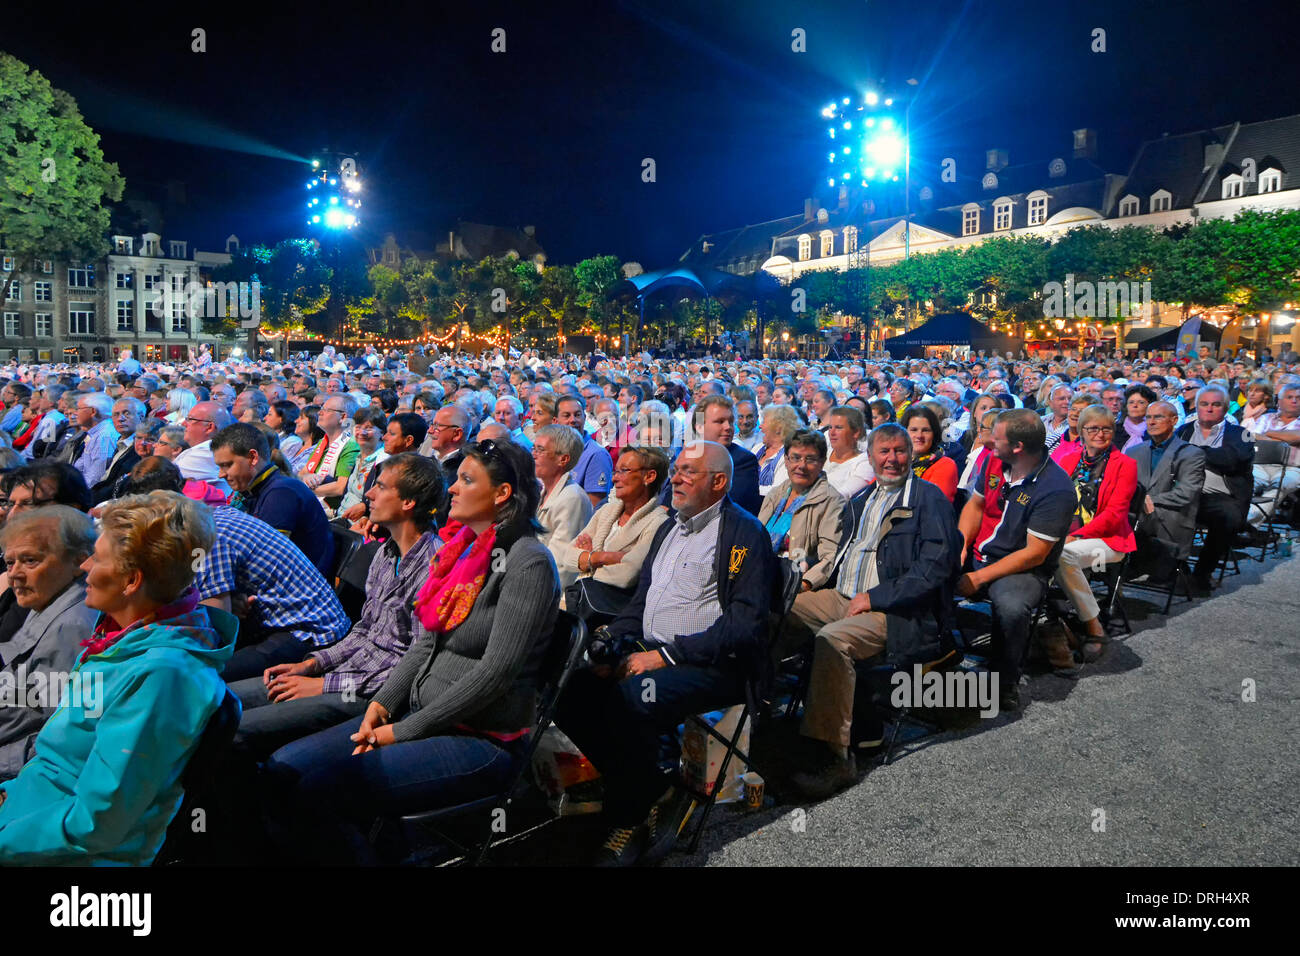 Crowds of people seated in a floodlit Vrijthof Square during an André Rieu music concert on a warm summer evening Maastricht Limburg Netherlands Stock Photo